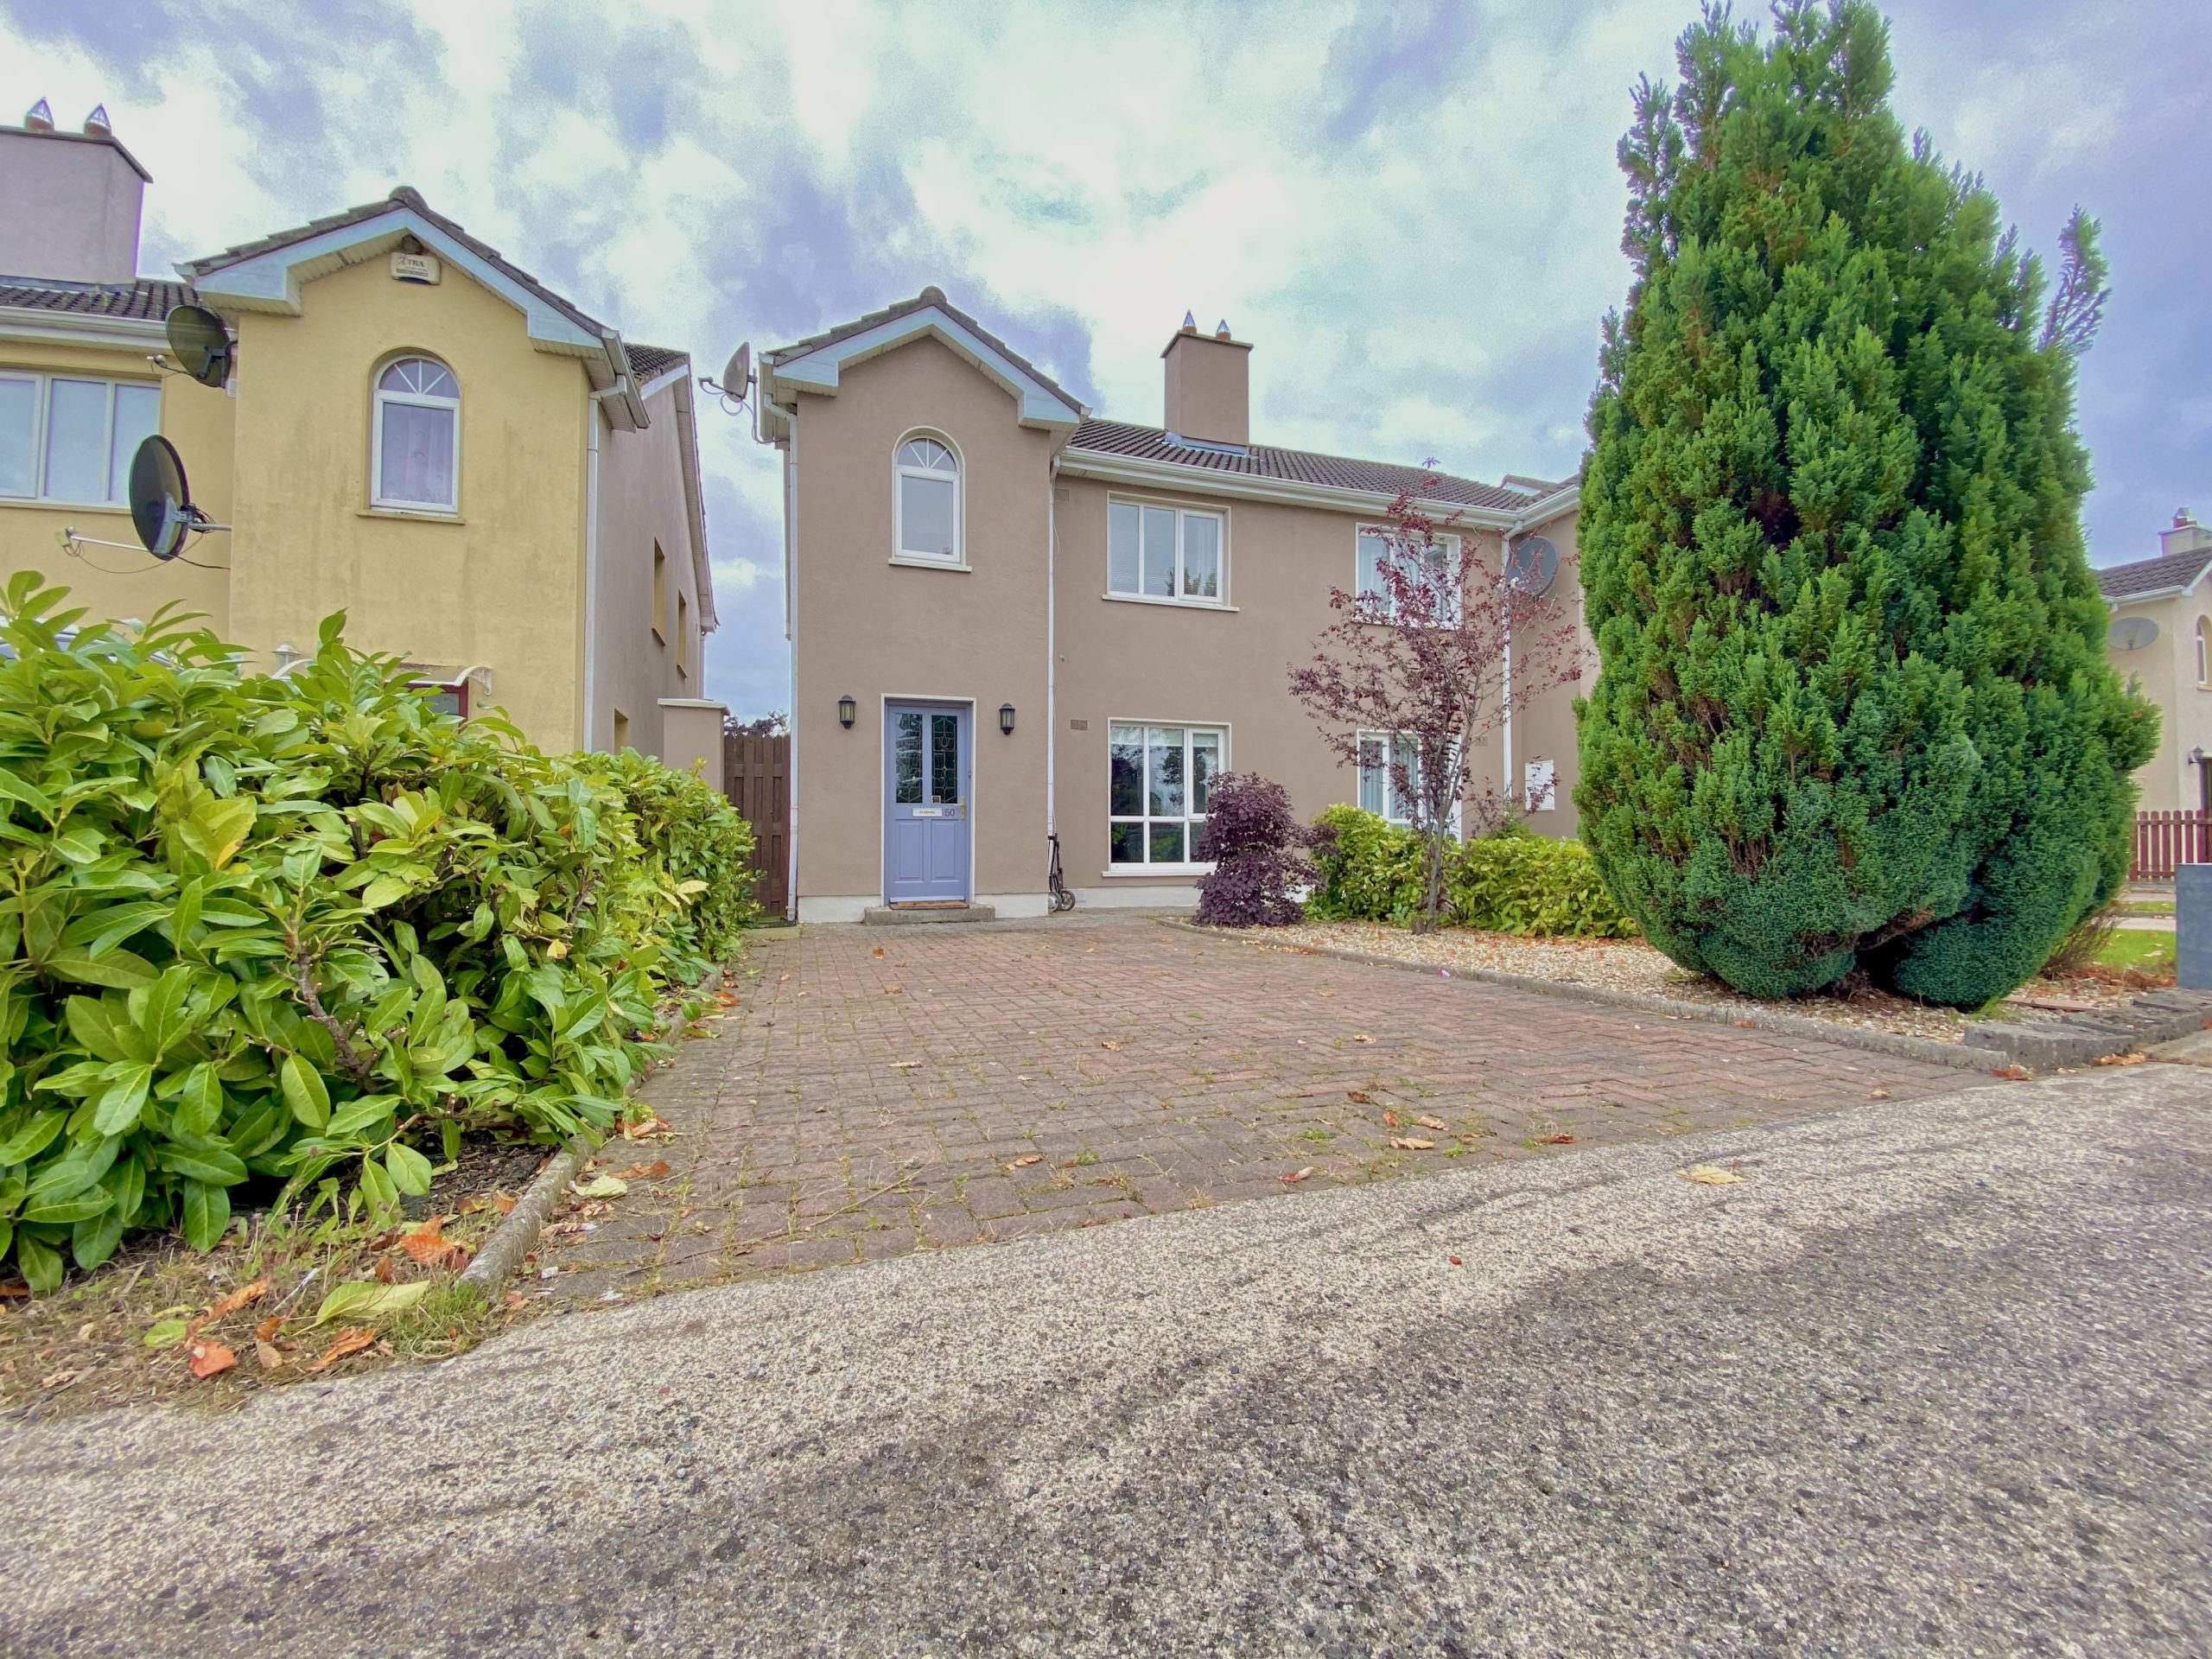 50 Annsfield Woods, Baylough, Athlone, Co. Westmeath